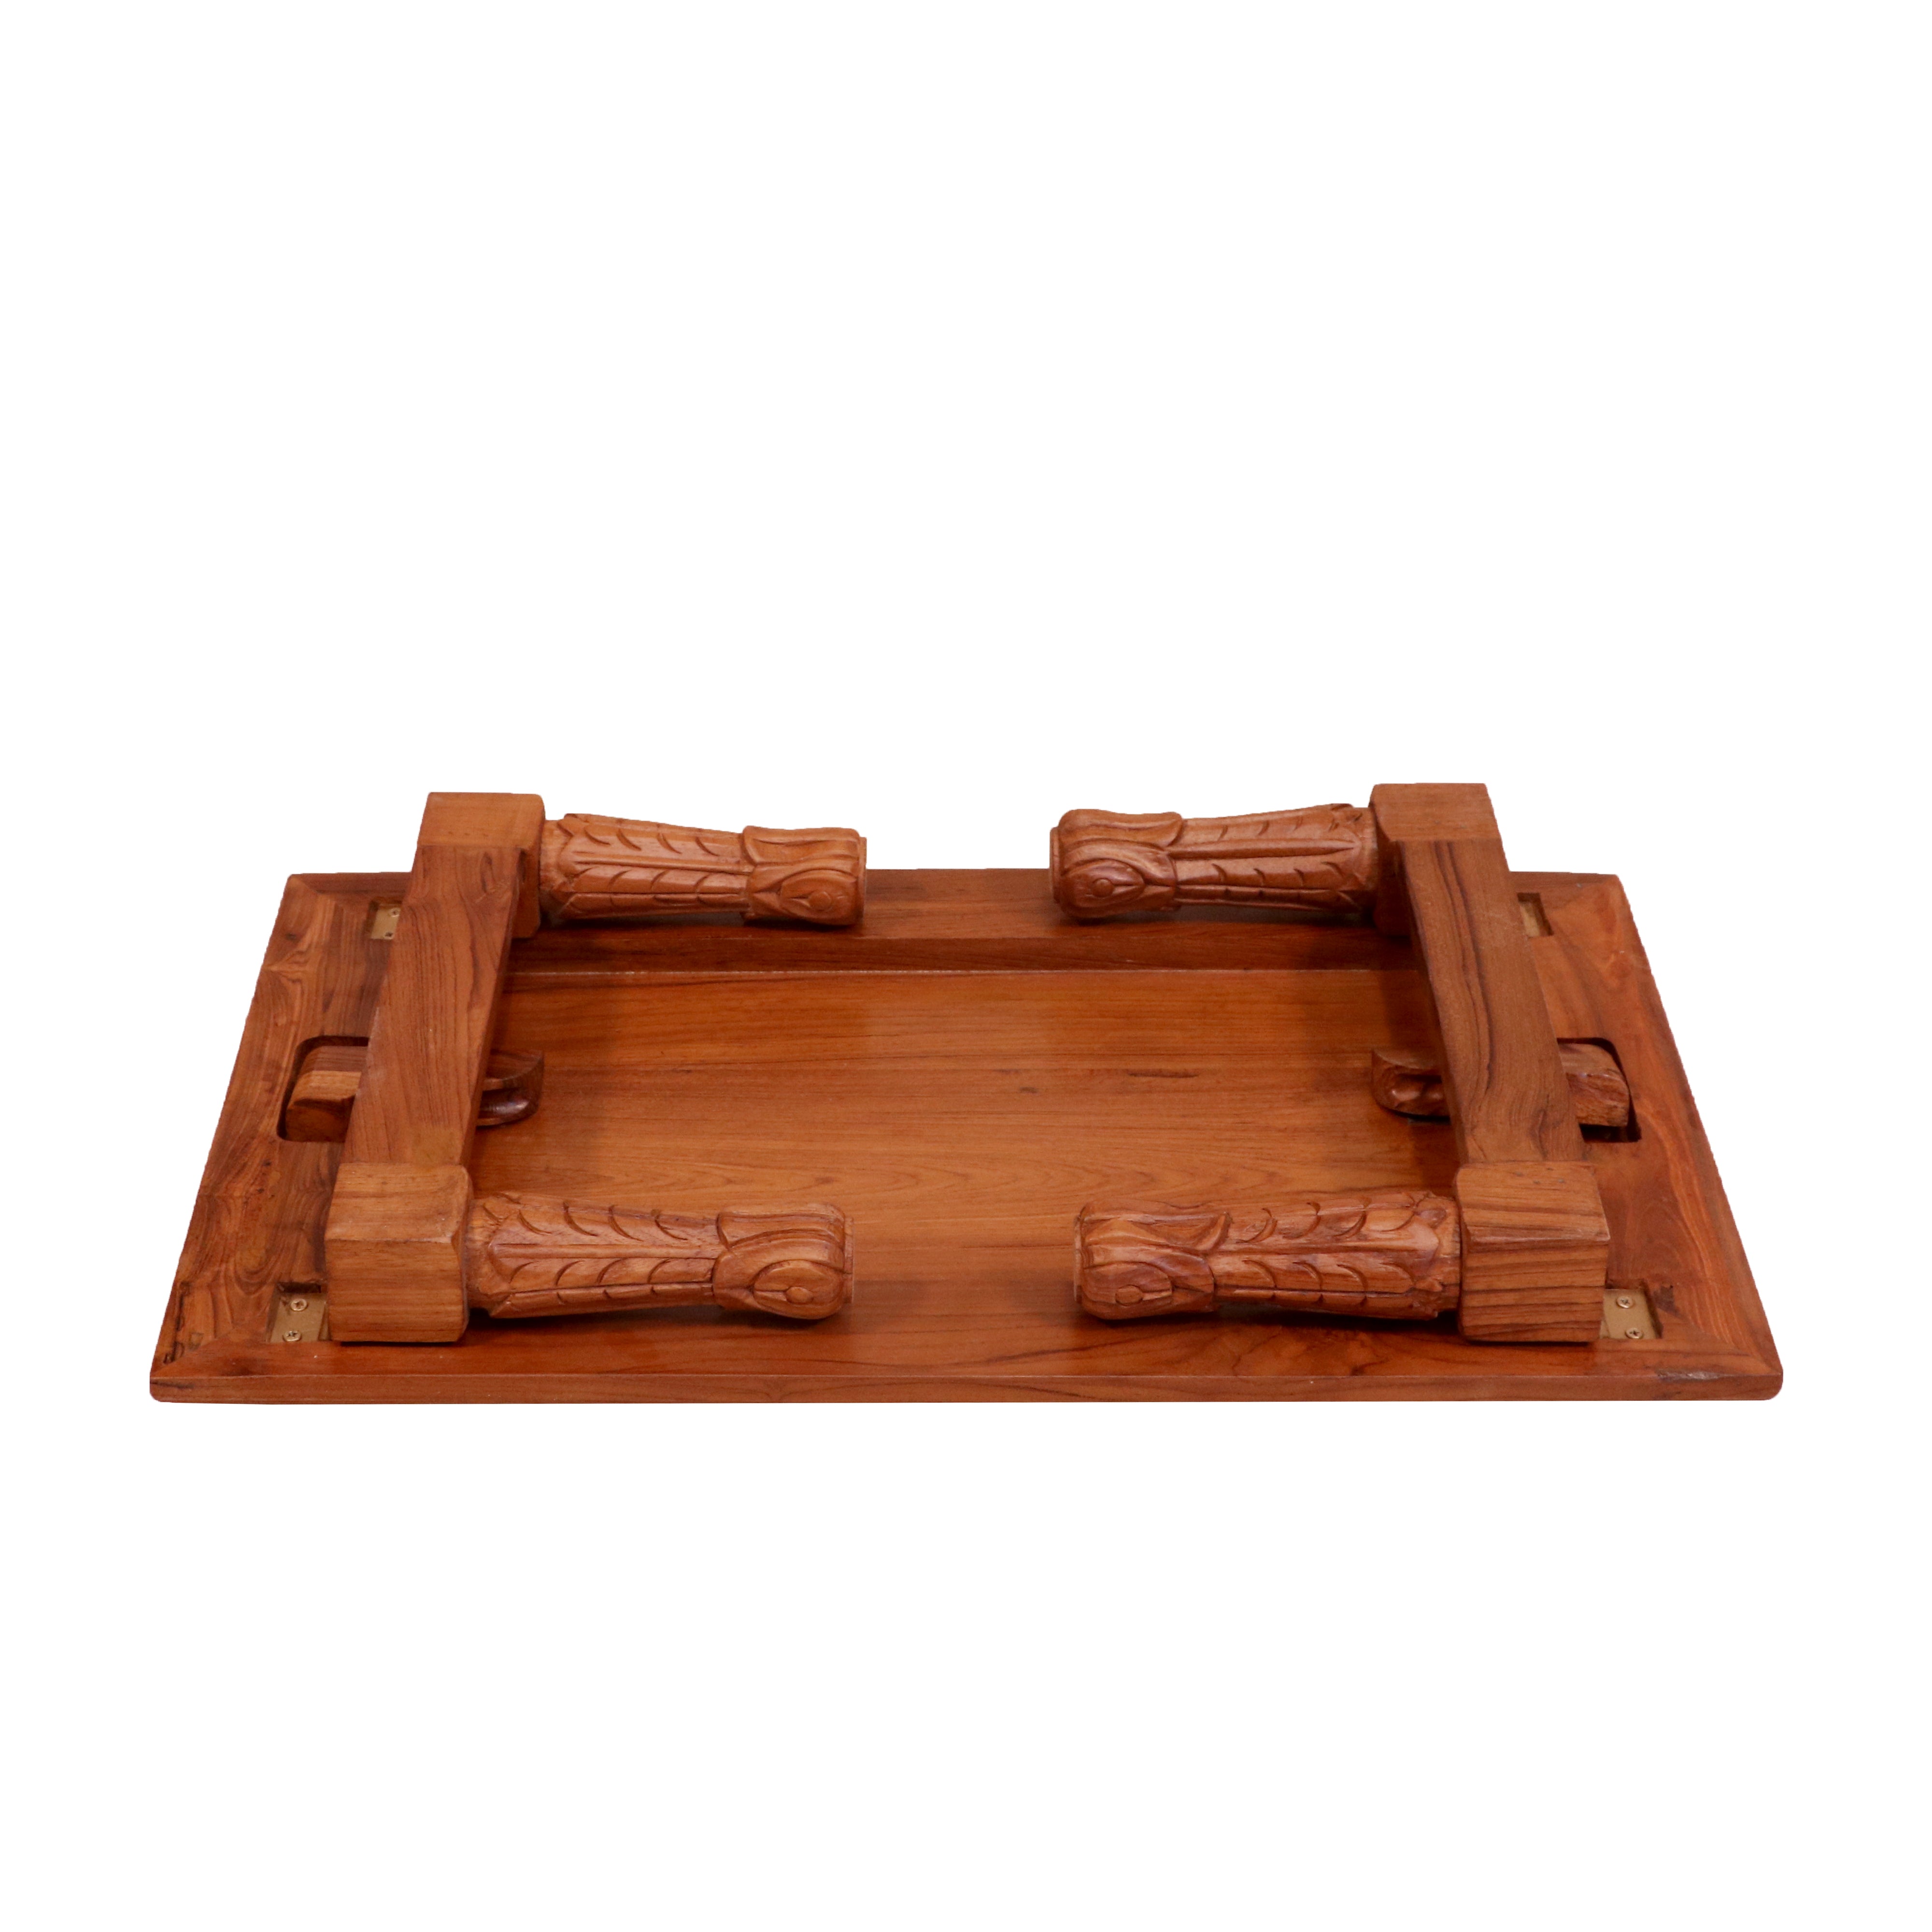 Old Traditional Long Legs Inlay Designed Handmade Wooden Foldable Bajot for Home Bajot